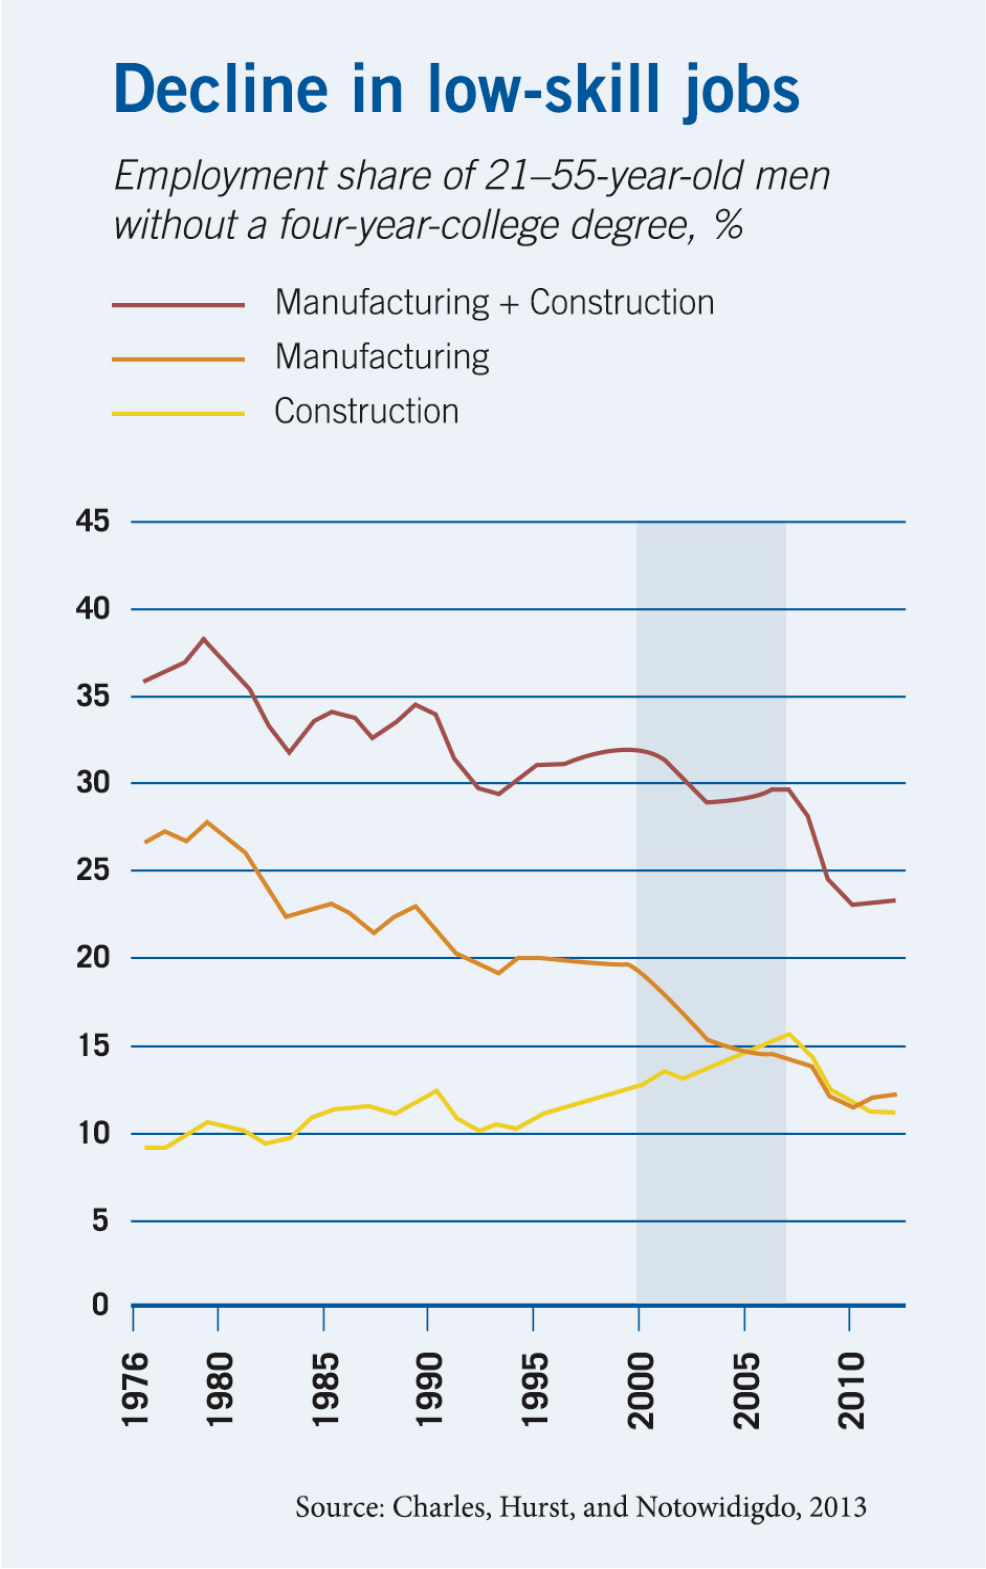 A line chart plotting the share of men without four-year college degree who were working in the manufacturing and construction industries, with percentages on the y-axis and the years of 1976 to 2012 on the x-axis. One line tracks the two industries combined for a high of thirty-eight percent in 1980, declining to about twenty-three percent in 2012. A second line tracks just manufacturing, starting at about twenty-seven and declining to about twelve. And a third line tracks Construction, which starts at nine percent and ends at eleven.